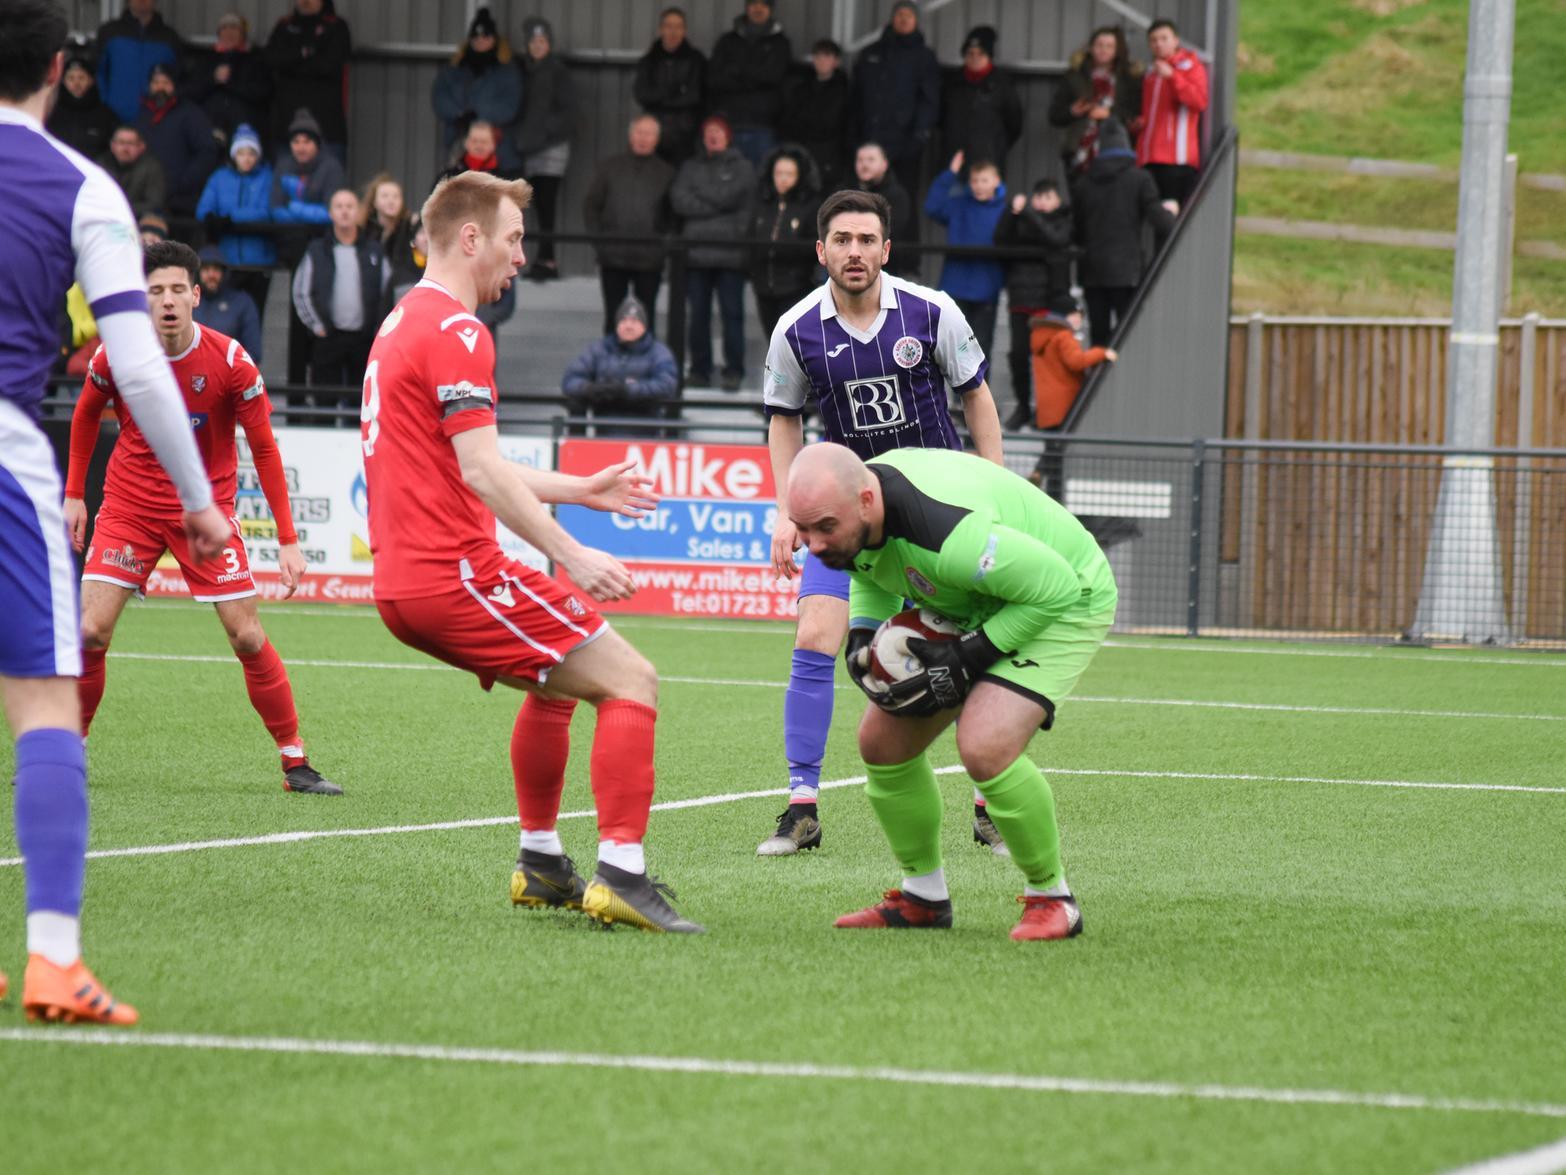 Scarborough Athletic 3-1 Ashton United / Pictures by Morgan Exley